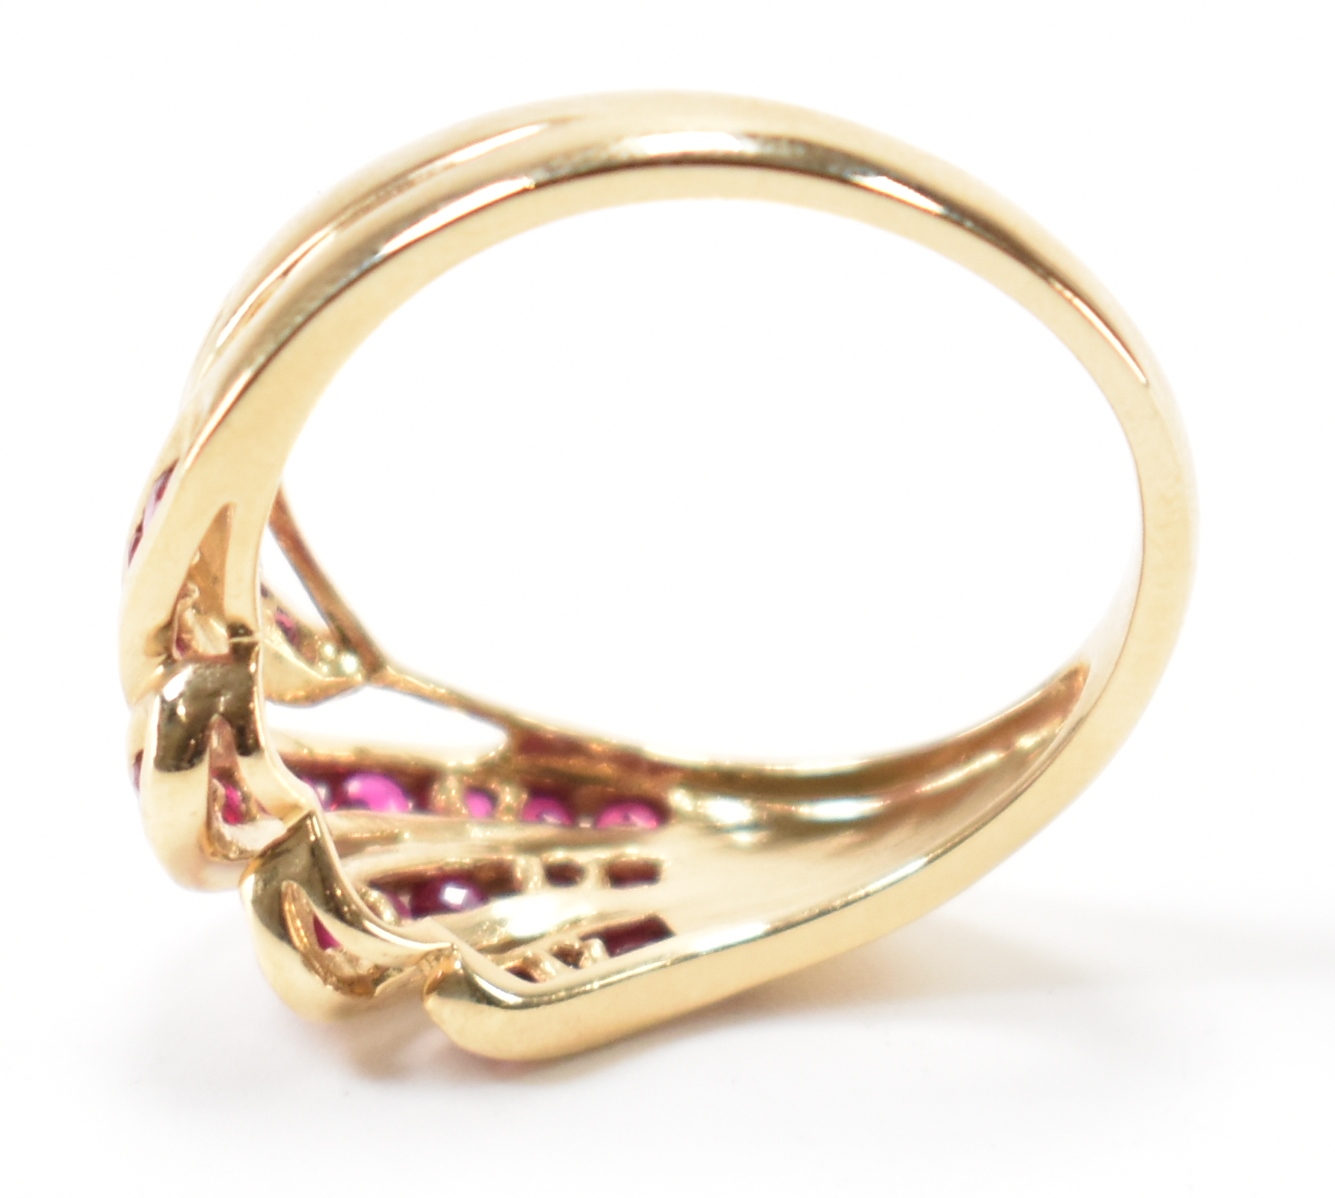 HALLMARKED 9CT GOLD & RUBY CROSSOVER RING - Image 7 of 8